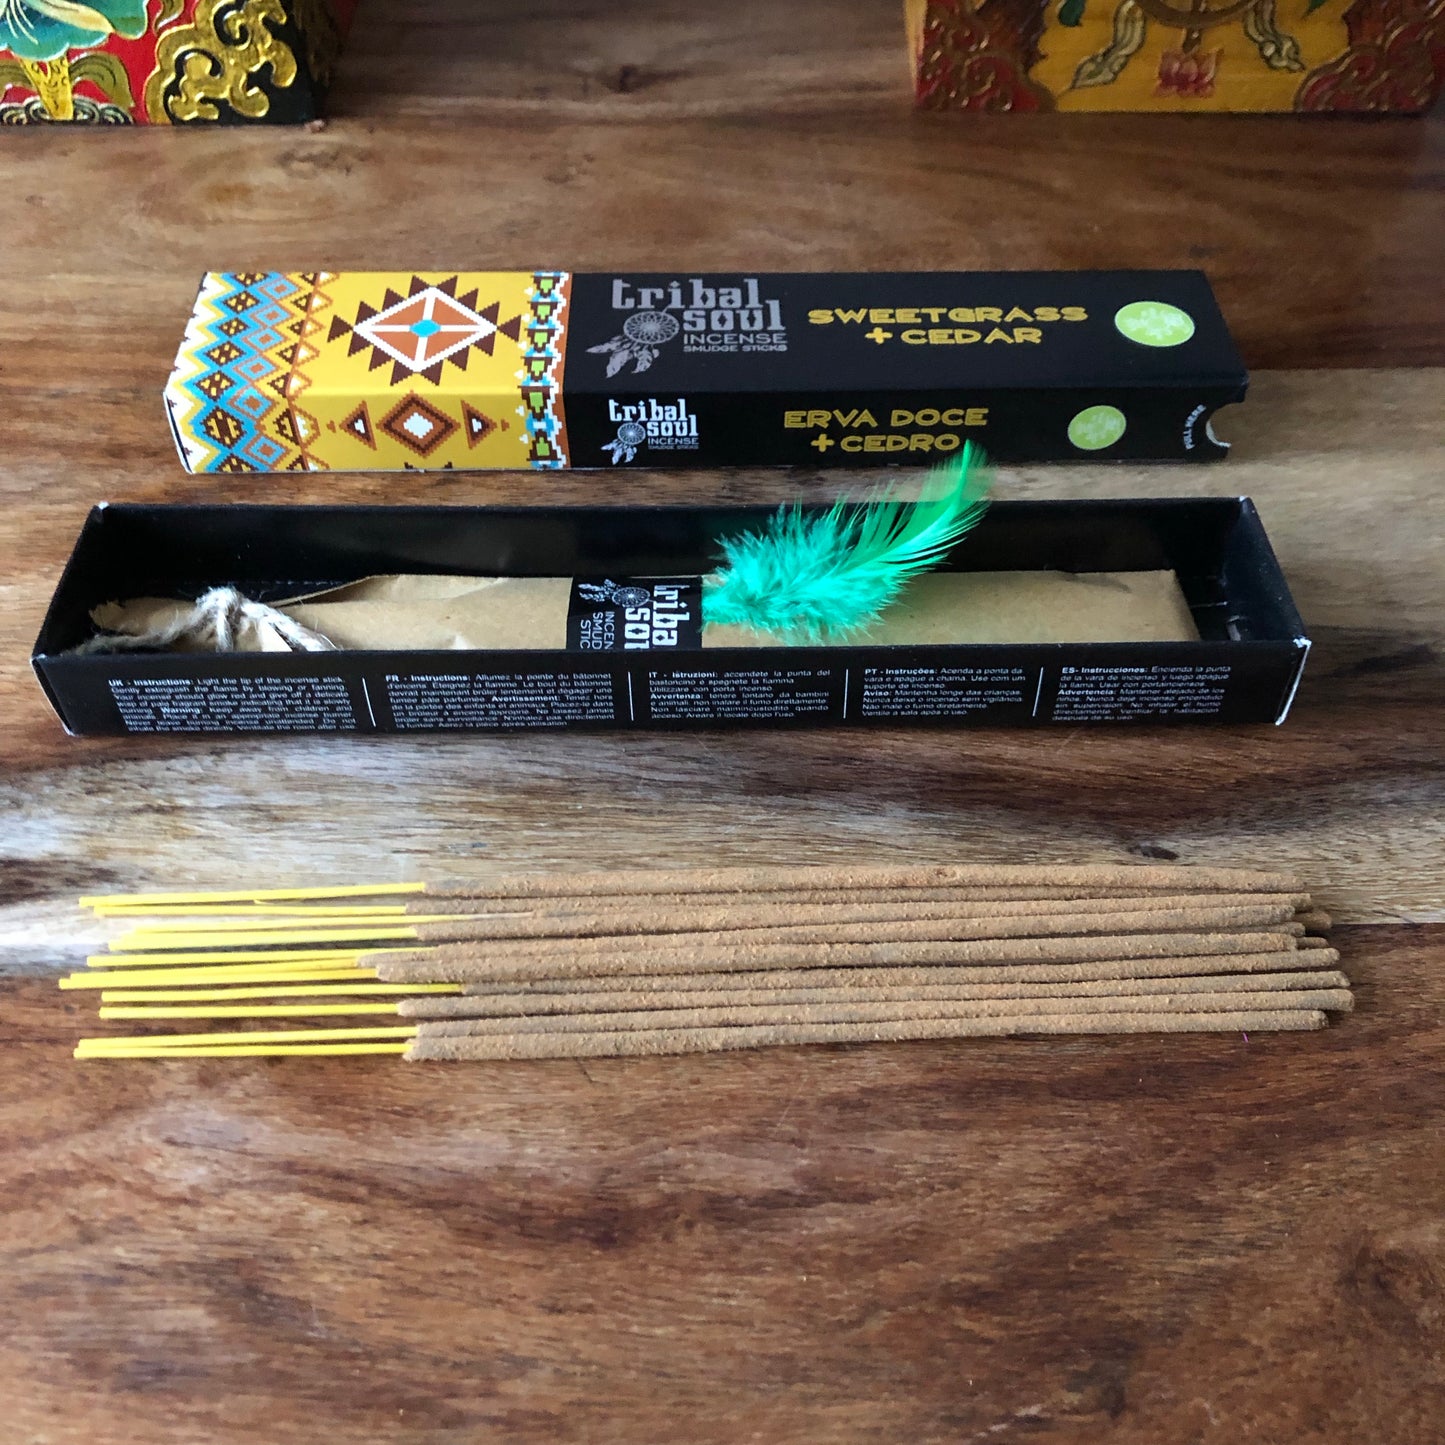 Tribal Soul Sweetgrass and Cedar Incense